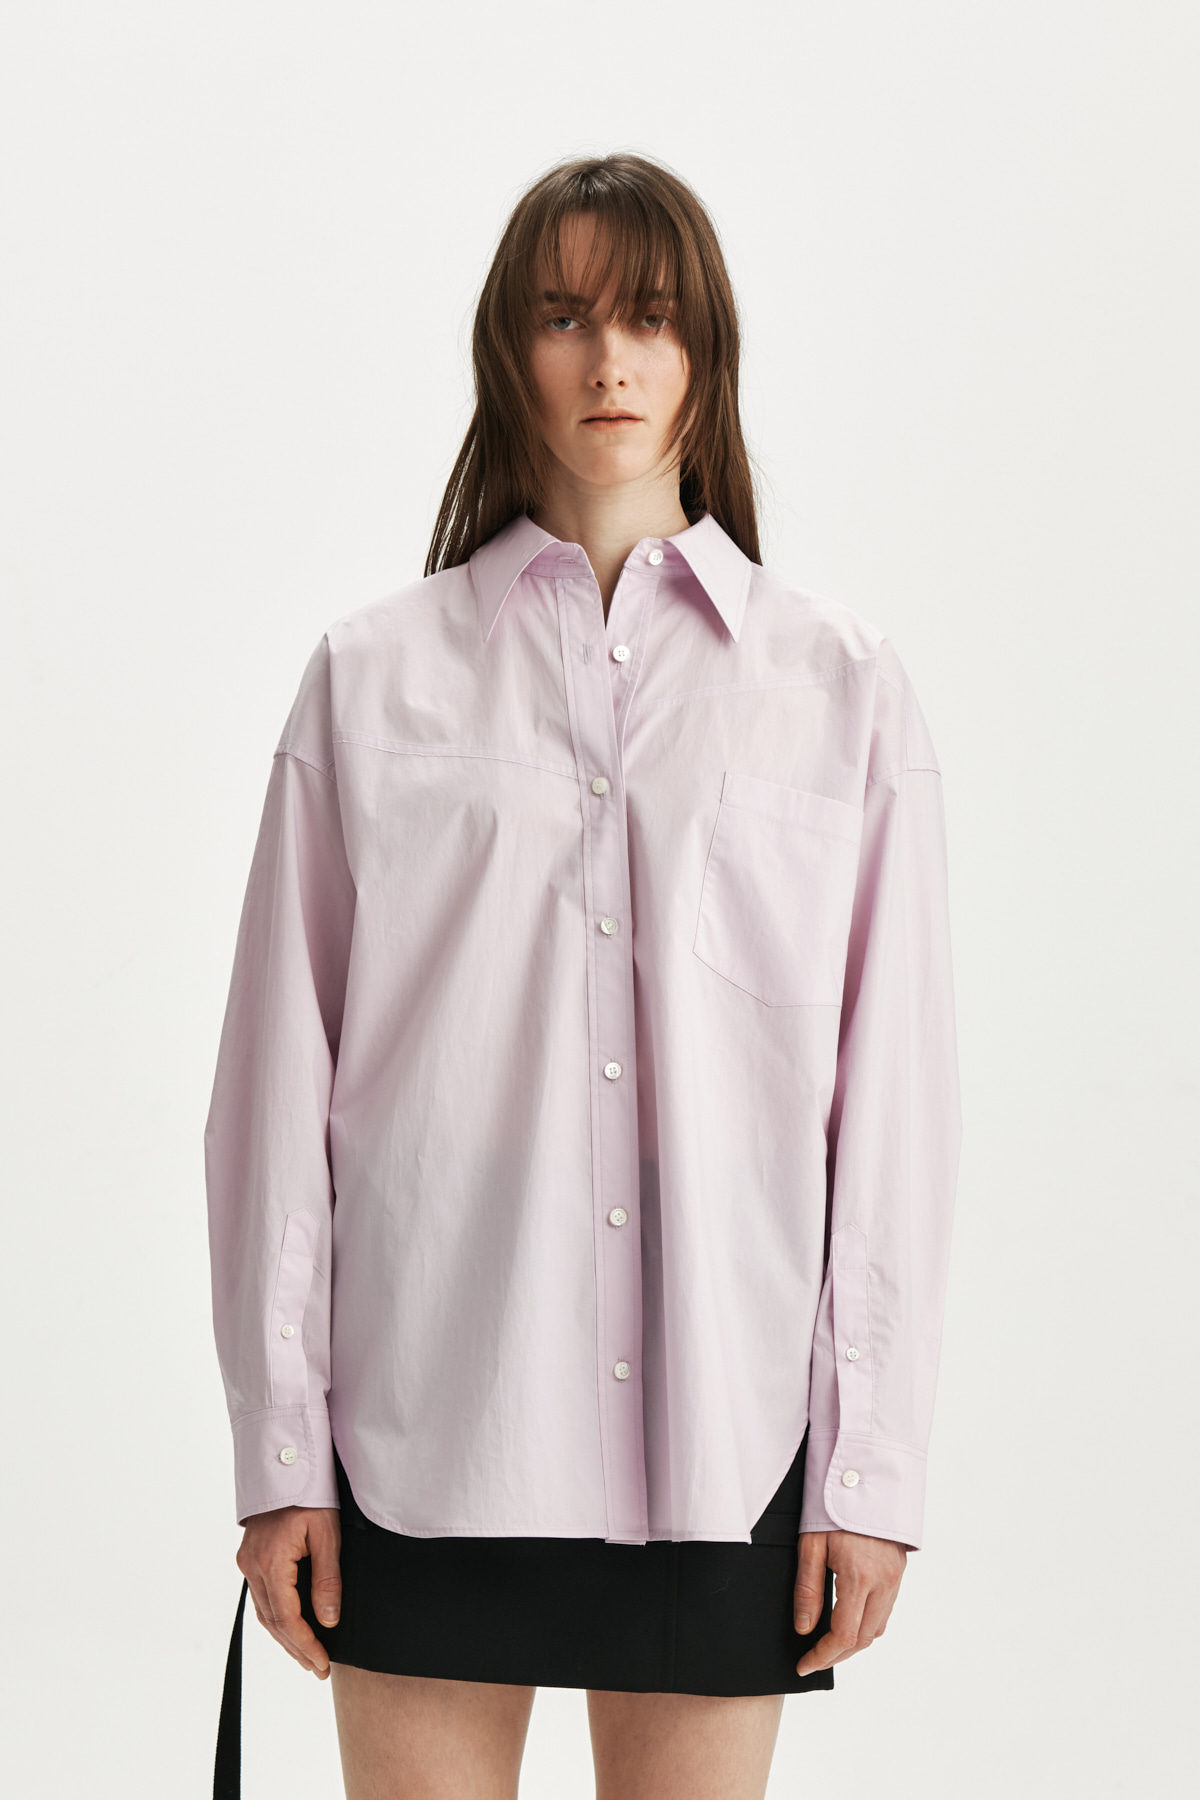 TWO WAY SILHOUETTE SHIRT IN PINK